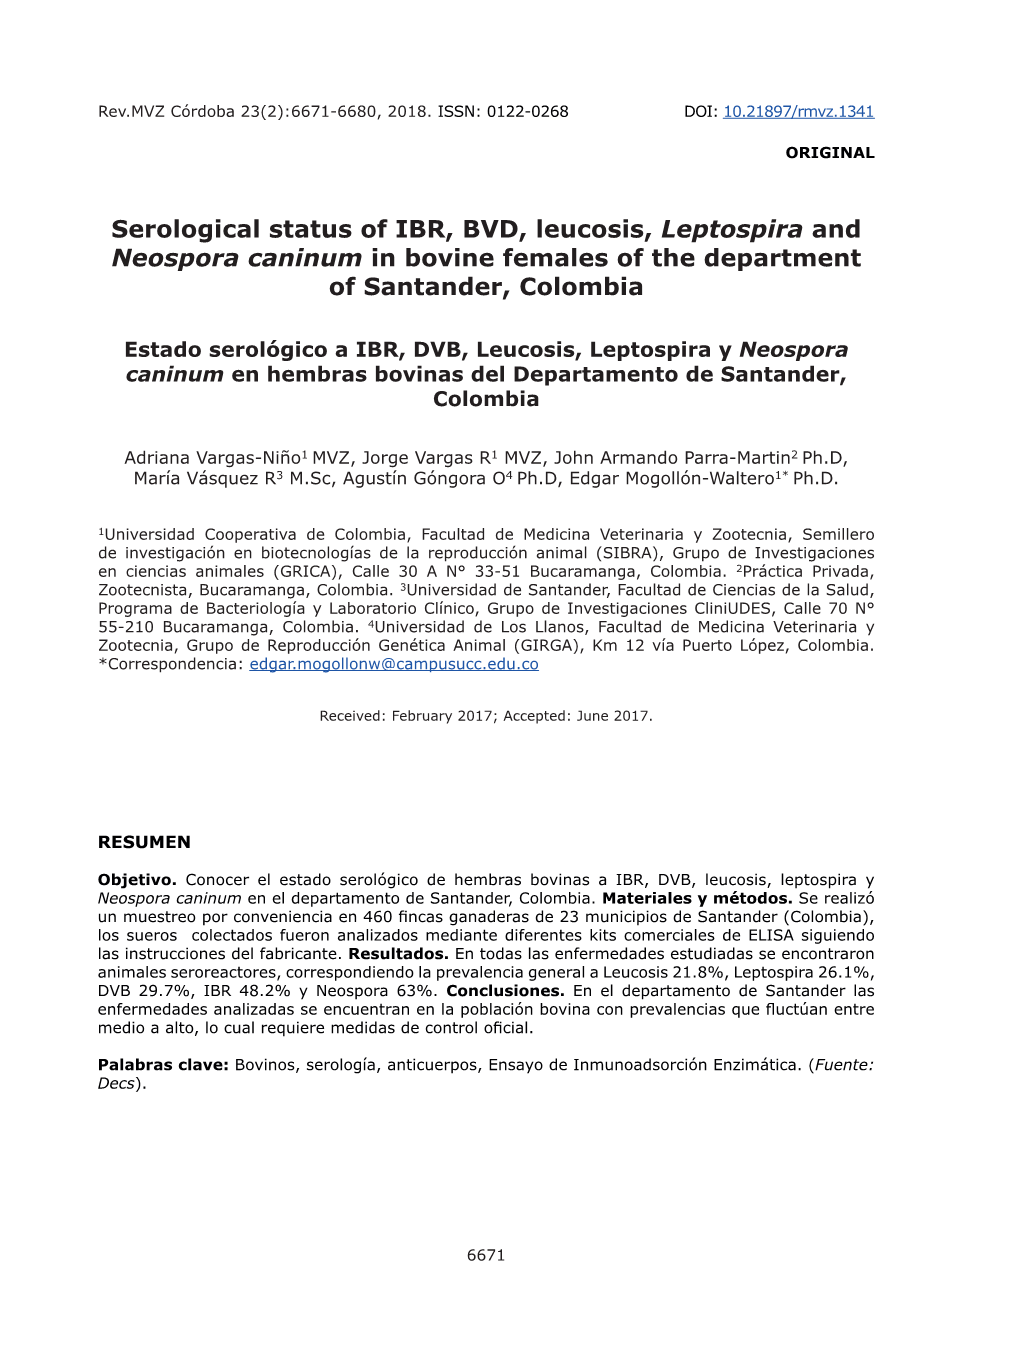 Serological Status of IBR, BVD, Leucosis, Leptospira and Neospora Caninum in Bovine Females of the Department of Santander, Colombia